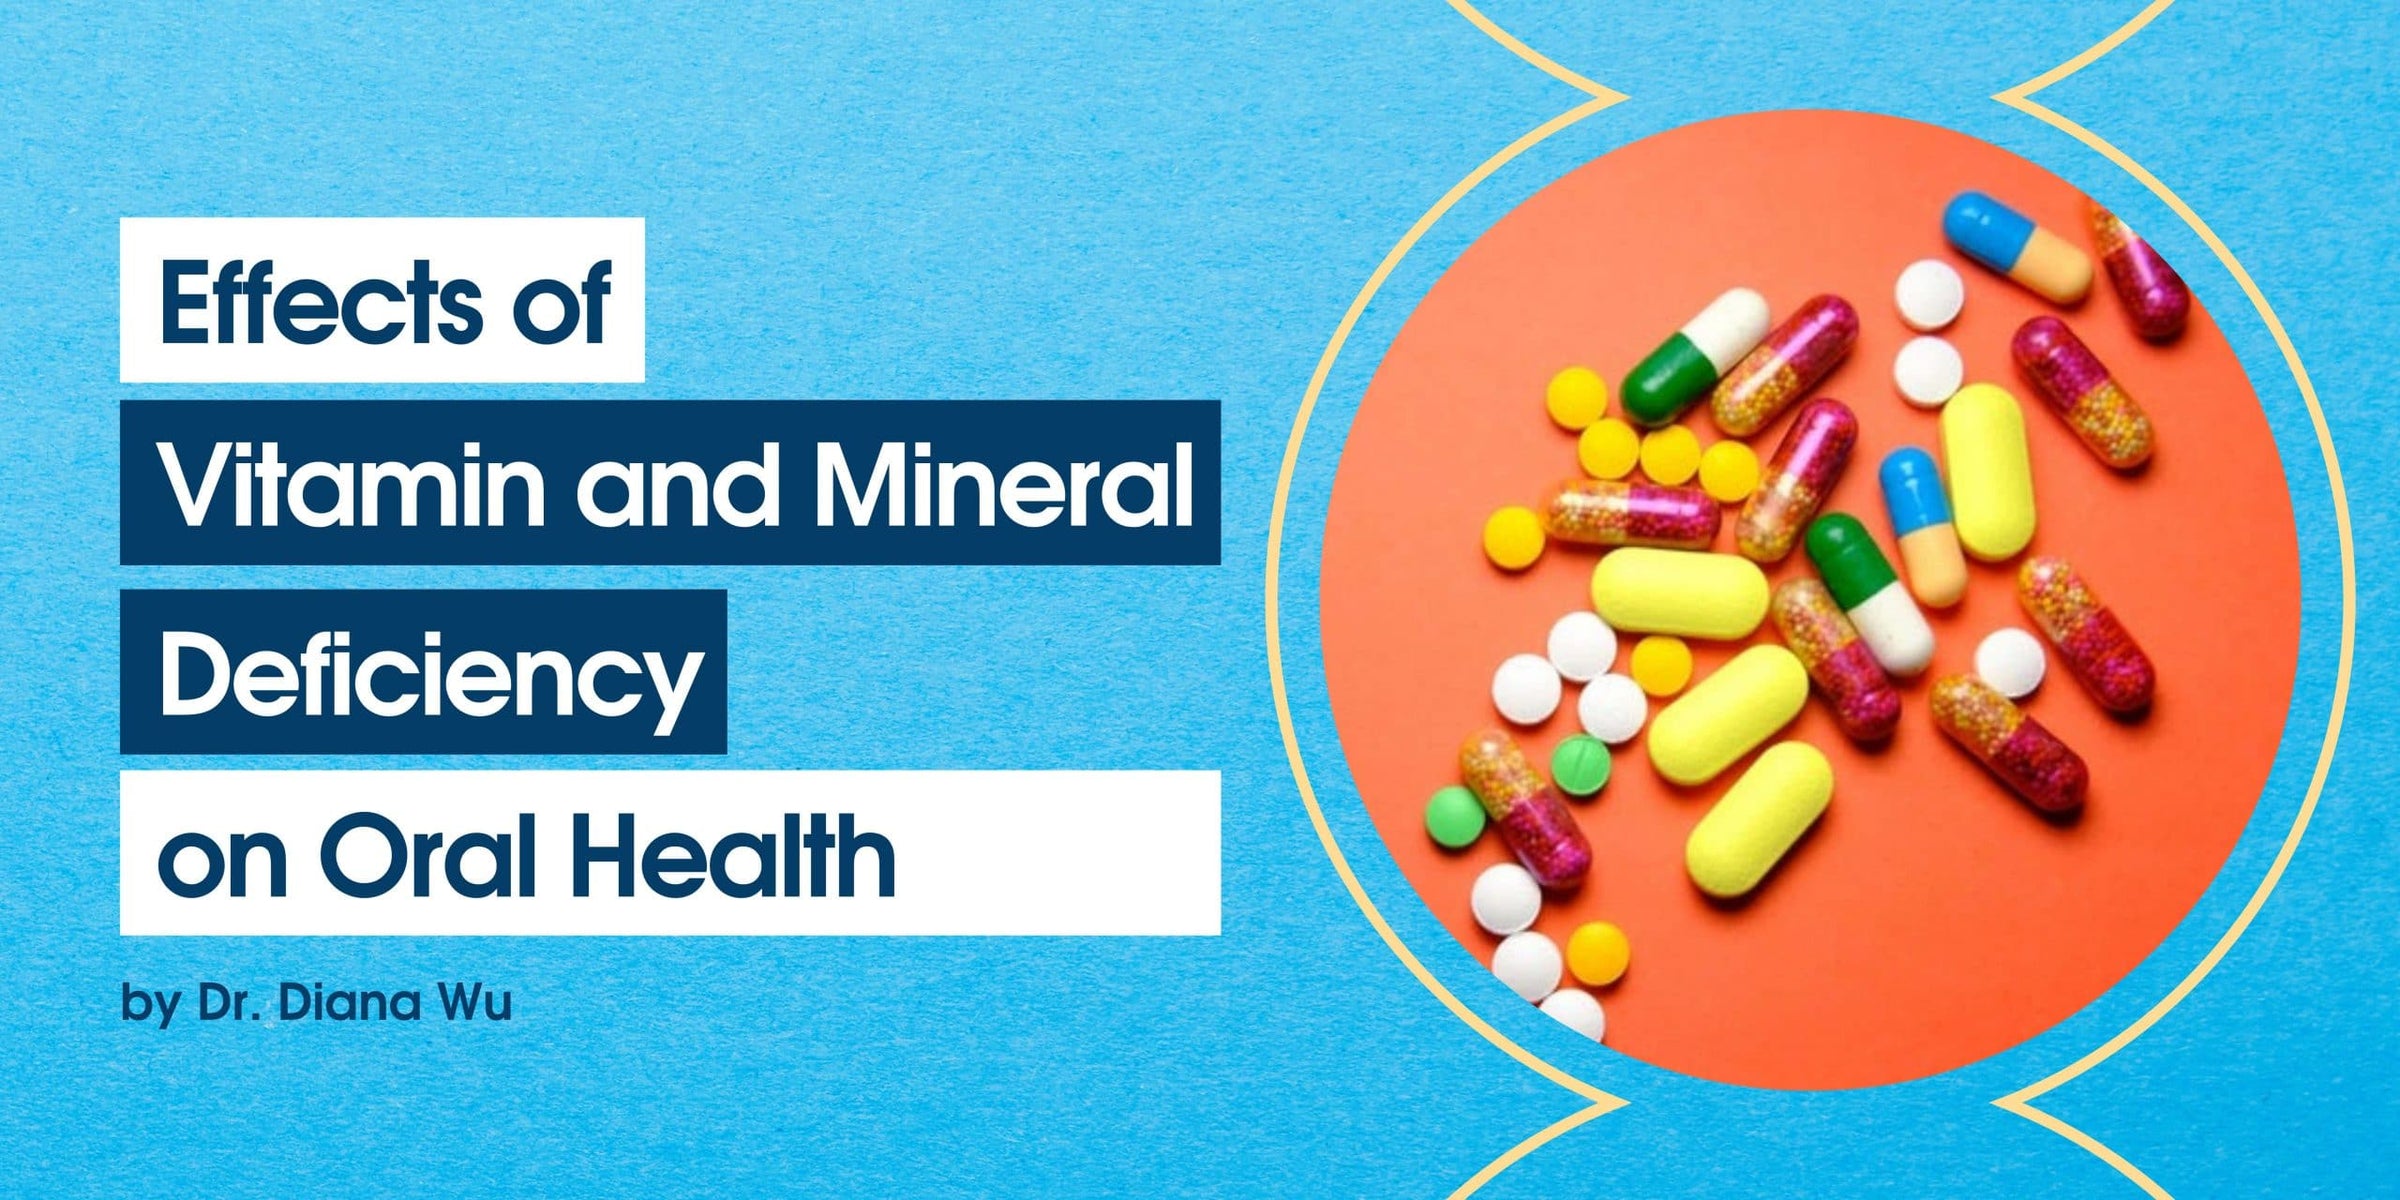 Effects of Vitamin & Mineral Deficiency on Oral Health Image